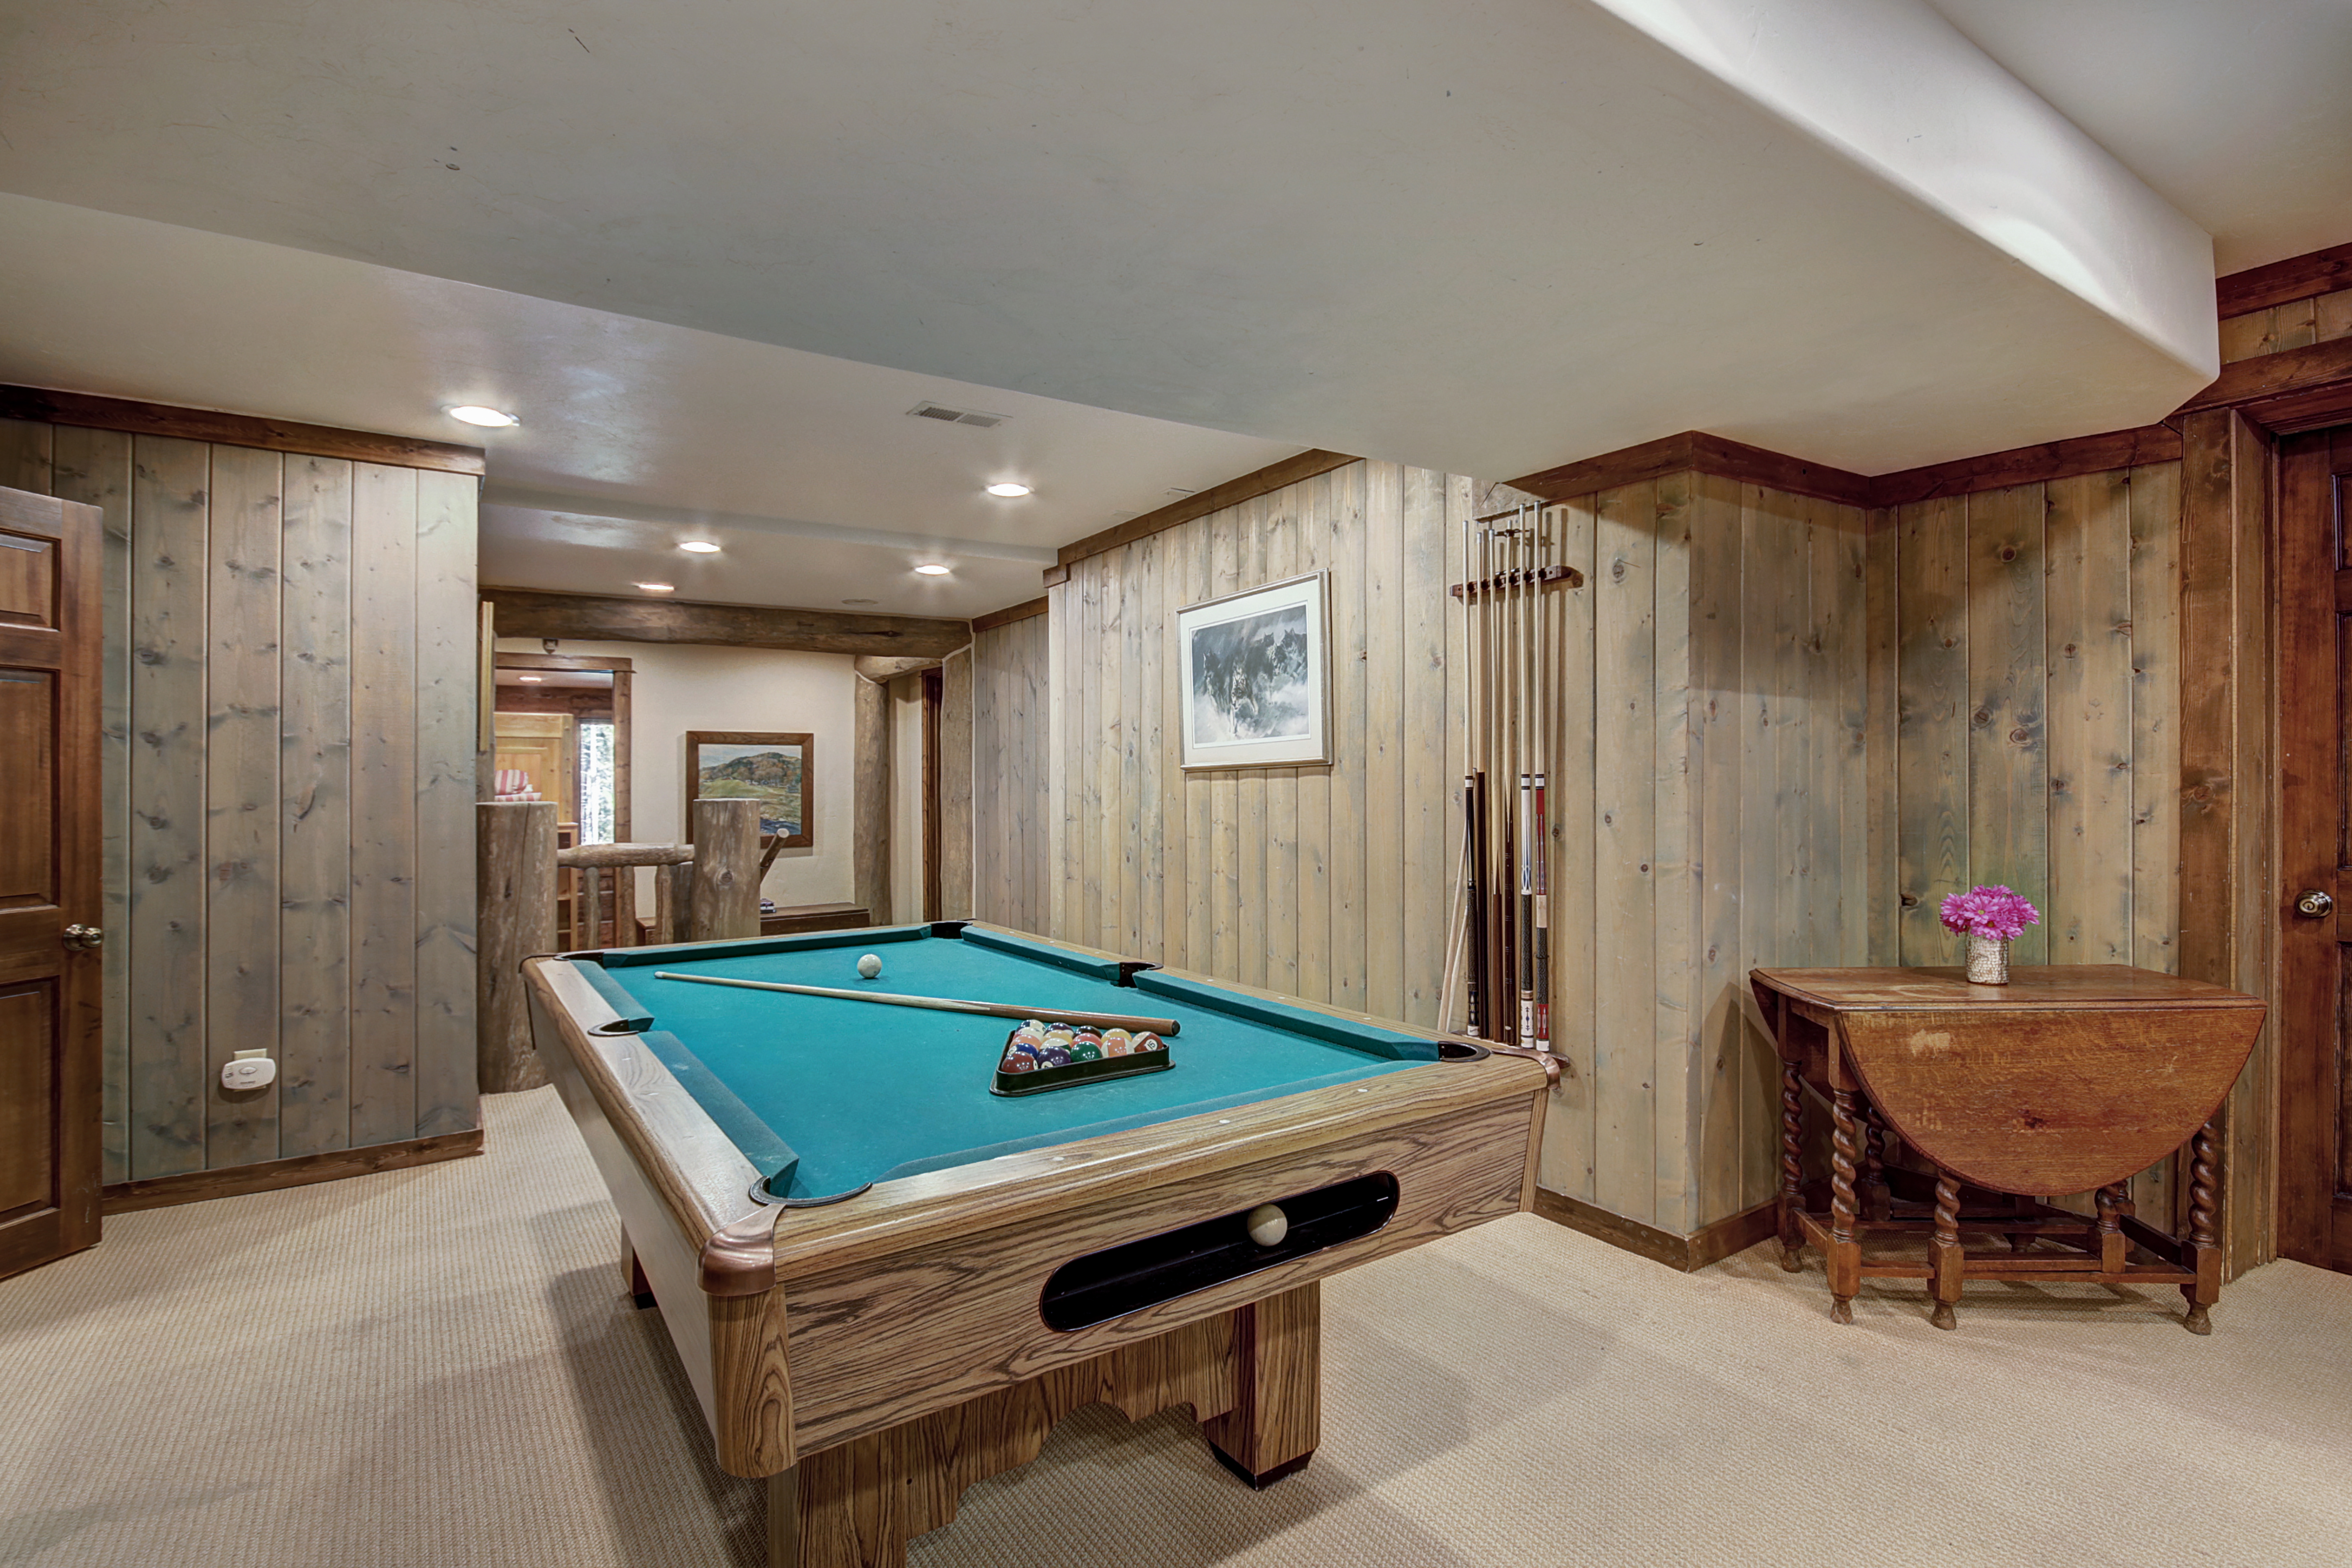 View of pool table and card table - Bear Lodge Breckenridge Vacation Rental